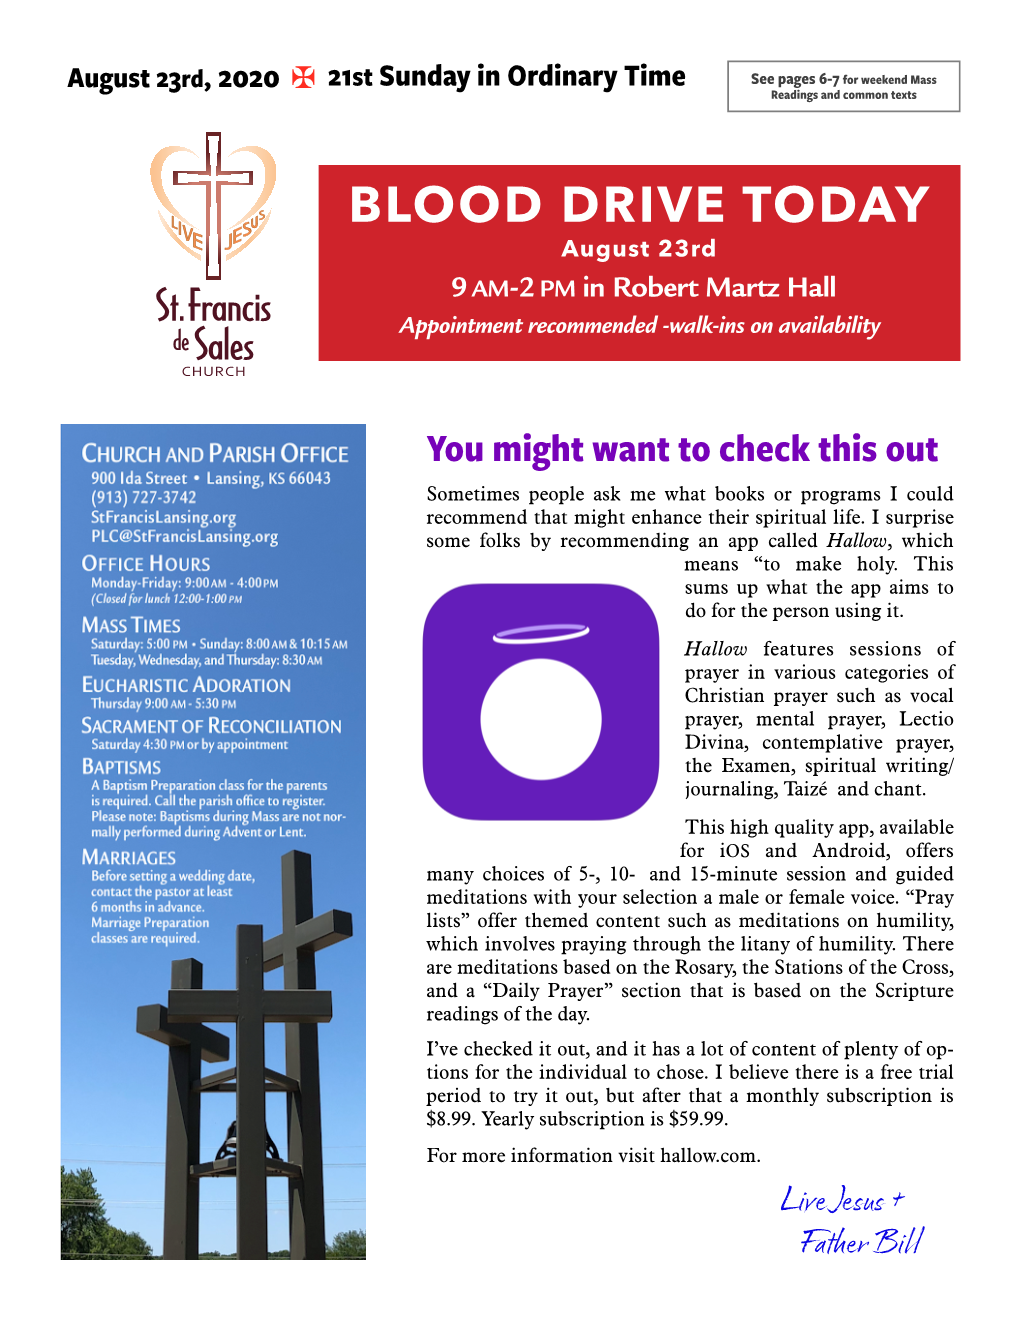 BLOOD DRIVE TODAY August 23Rd